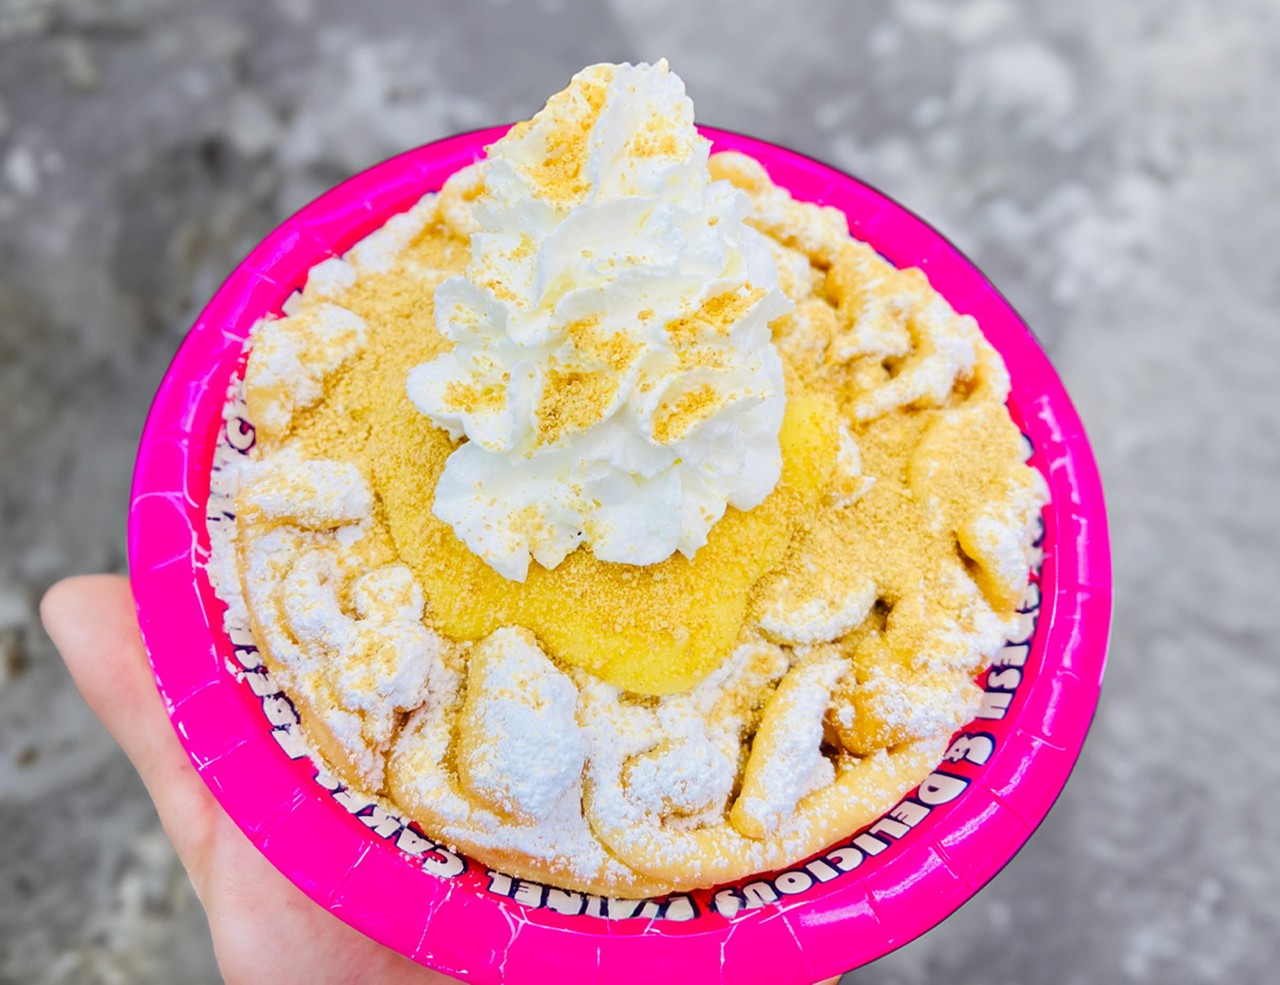 BANANA CREAM PIE FUNNEL CAKE
Fresh hot funnel cake topped with banana pudding, whipped cream and graham cracker crust.
Ryals Concessions Sweet Shop